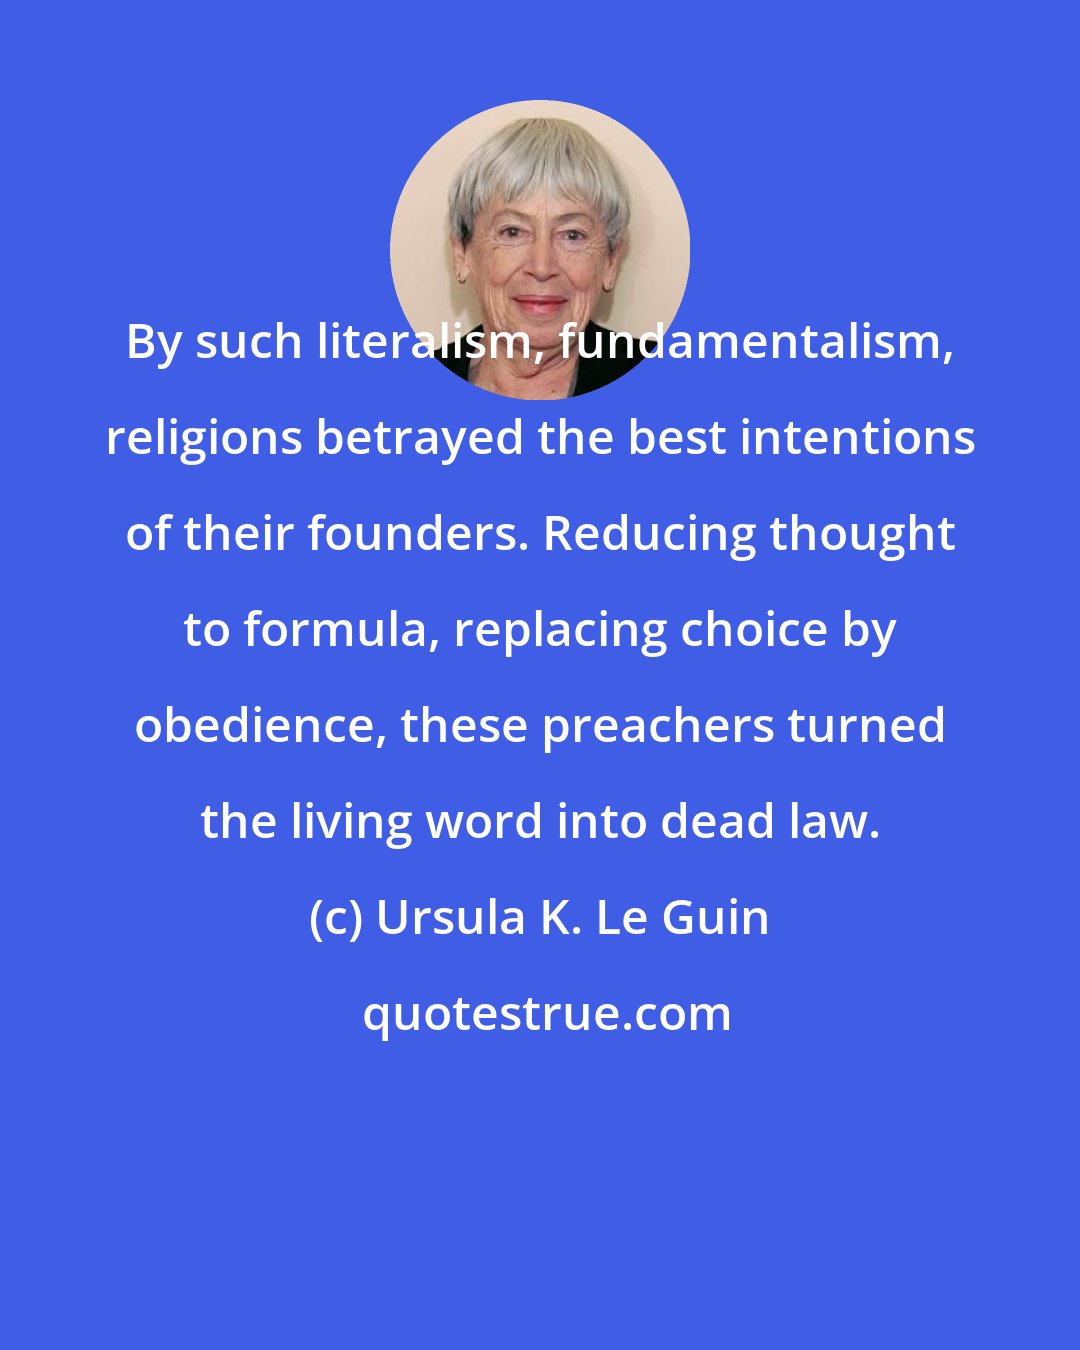 Ursula K. Le Guin: By such literalism, fundamentalism, religions betrayed the best intentions of their founders. Reducing thought to formula, replacing choice by obedience, these preachers turned the living word into dead law.